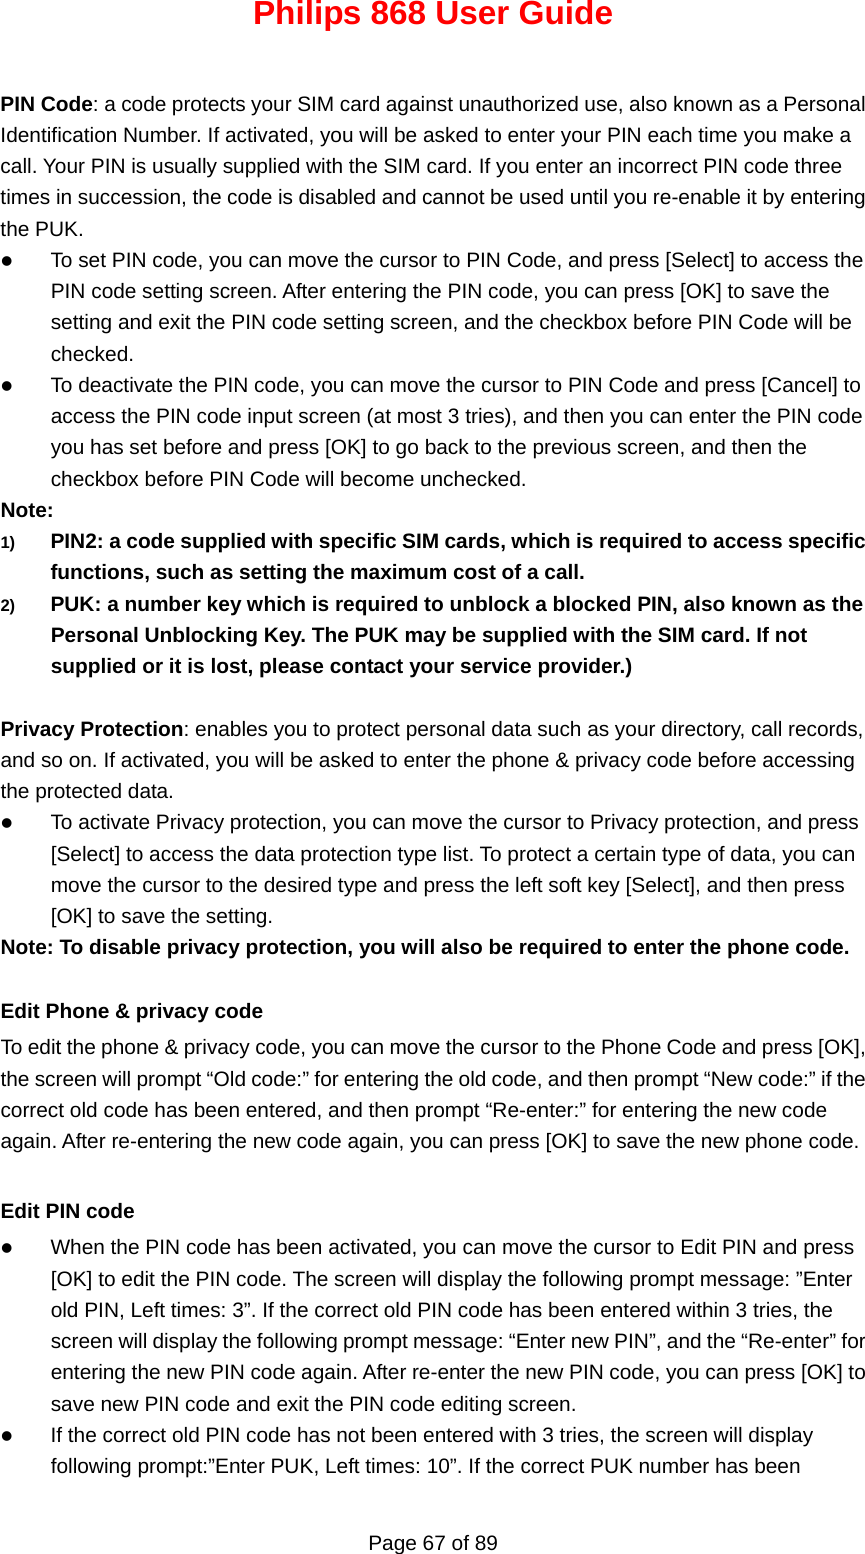 Philips 868 User Guide Page 67 of 89  PIN Code: a code protects your SIM card against unauthorized use, also known as a Personal Identification Number. If activated, you will be asked to enter your PIN each time you make a call. Your PIN is usually supplied with the SIM card. If you enter an incorrect PIN code three times in succession, the code is disabled and cannot be used until you re-enable it by entering the PUK. z To set PIN code, you can move the cursor to PIN Code, and press [Select] to access the PIN code setting screen. After entering the PIN code, you can press [OK] to save the setting and exit the PIN code setting screen, and the checkbox before PIN Code will be checked. z To deactivate the PIN code, you can move the cursor to PIN Code and press [Cancel] to access the PIN code input screen (at most 3 tries), and then you can enter the PIN code you has set before and press [OK] to go back to the previous screen, and then the checkbox before PIN Code will become unchecked. Note: 1)  PIN2: a code supplied with specific SIM cards, which is required to access specific functions, such as setting the maximum cost of a call. 2)  PUK: a number key which is required to unblock a blocked PIN, also known as the Personal Unblocking Key. The PUK may be supplied with the SIM card. If not supplied or it is lost, please contact your service provider.)  Privacy Protection: enables you to protect personal data such as your directory, call records, and so on. If activated, you will be asked to enter the phone &amp; privacy code before accessing the protected data. z To activate Privacy protection, you can move the cursor to Privacy protection, and press [Select] to access the data protection type list. To protect a certain type of data, you can move the cursor to the desired type and press the left soft key [Select], and then press [OK] to save the setting. Note: To disable privacy protection, you will also be required to enter the phone code.  Edit Phone &amp; privacy code To edit the phone &amp; privacy code, you can move the cursor to the Phone Code and press [OK], the screen will prompt “Old code:” for entering the old code, and then prompt “New code:” if the correct old code has been entered, and then prompt “Re-enter:” for entering the new code again. After re-entering the new code again, you can press [OK] to save the new phone code.  Edit PIN code z When the PIN code has been activated, you can move the cursor to Edit PIN and press [OK] to edit the PIN code. The screen will display the following prompt message: ”Enter old PIN, Left times: 3”. If the correct old PIN code has been entered within 3 tries, the screen will display the following prompt message: “Enter new PIN”, and the “Re-enter” for entering the new PIN code again. After re-enter the new PIN code, you can press [OK] to save new PIN code and exit the PIN code editing screen. z If the correct old PIN code has not been entered with 3 tries, the screen will display following prompt:”Enter PUK, Left times: 10”. If the correct PUK number has been 